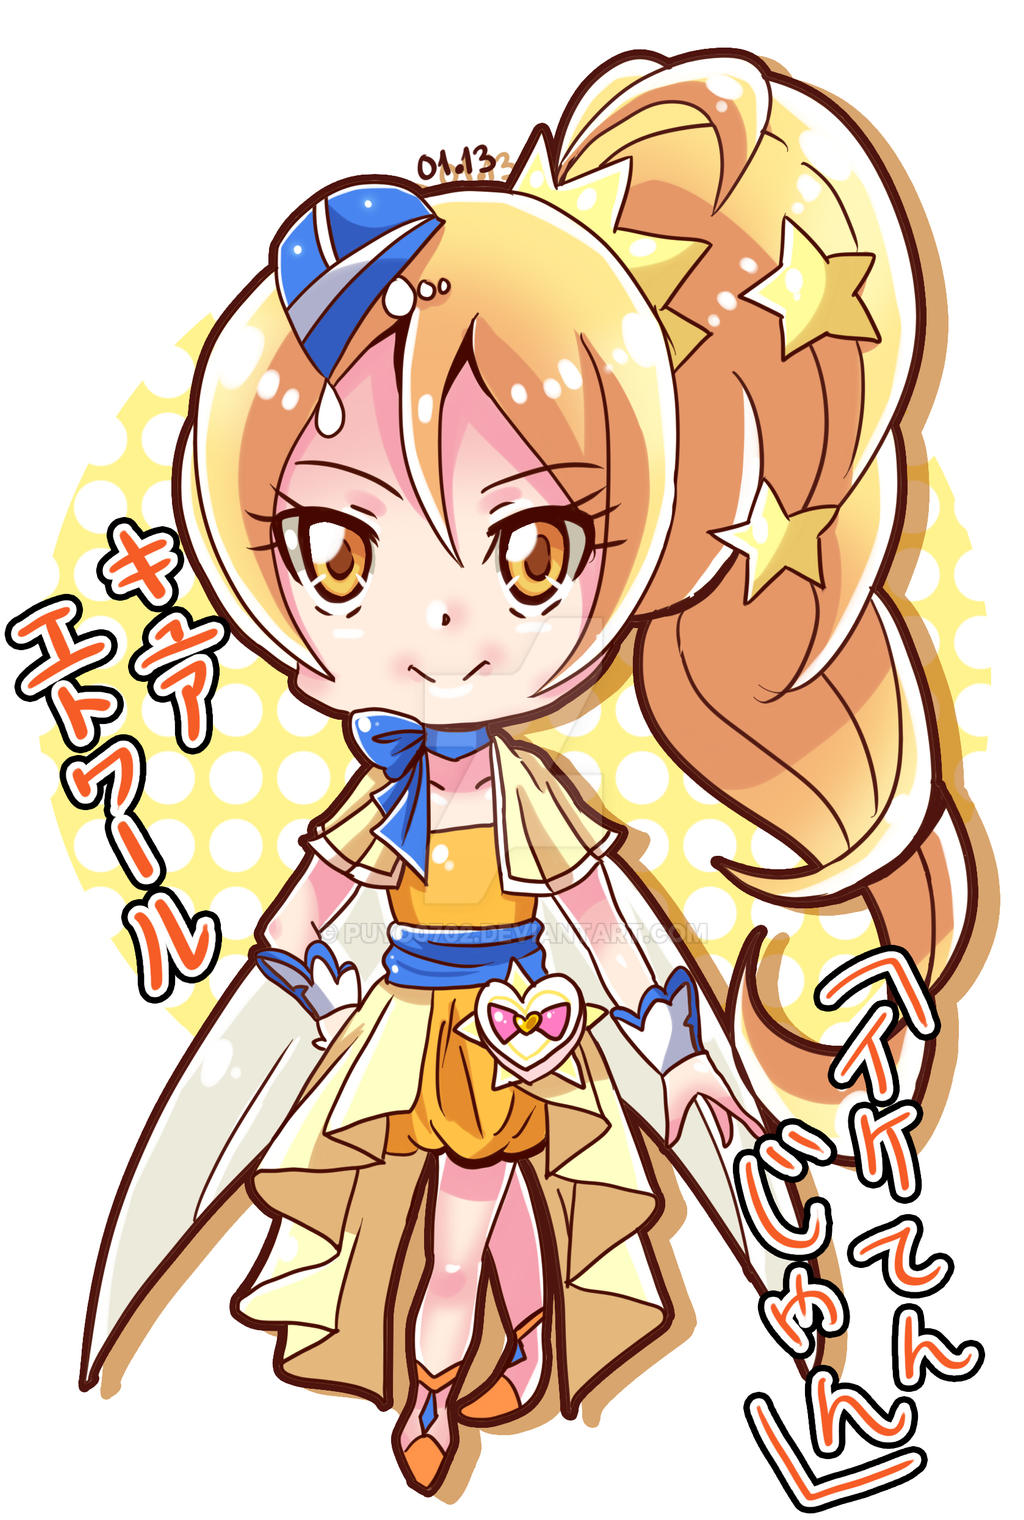 Precure of Strength Cure Etoile by Puyo0702 on DeviantArt